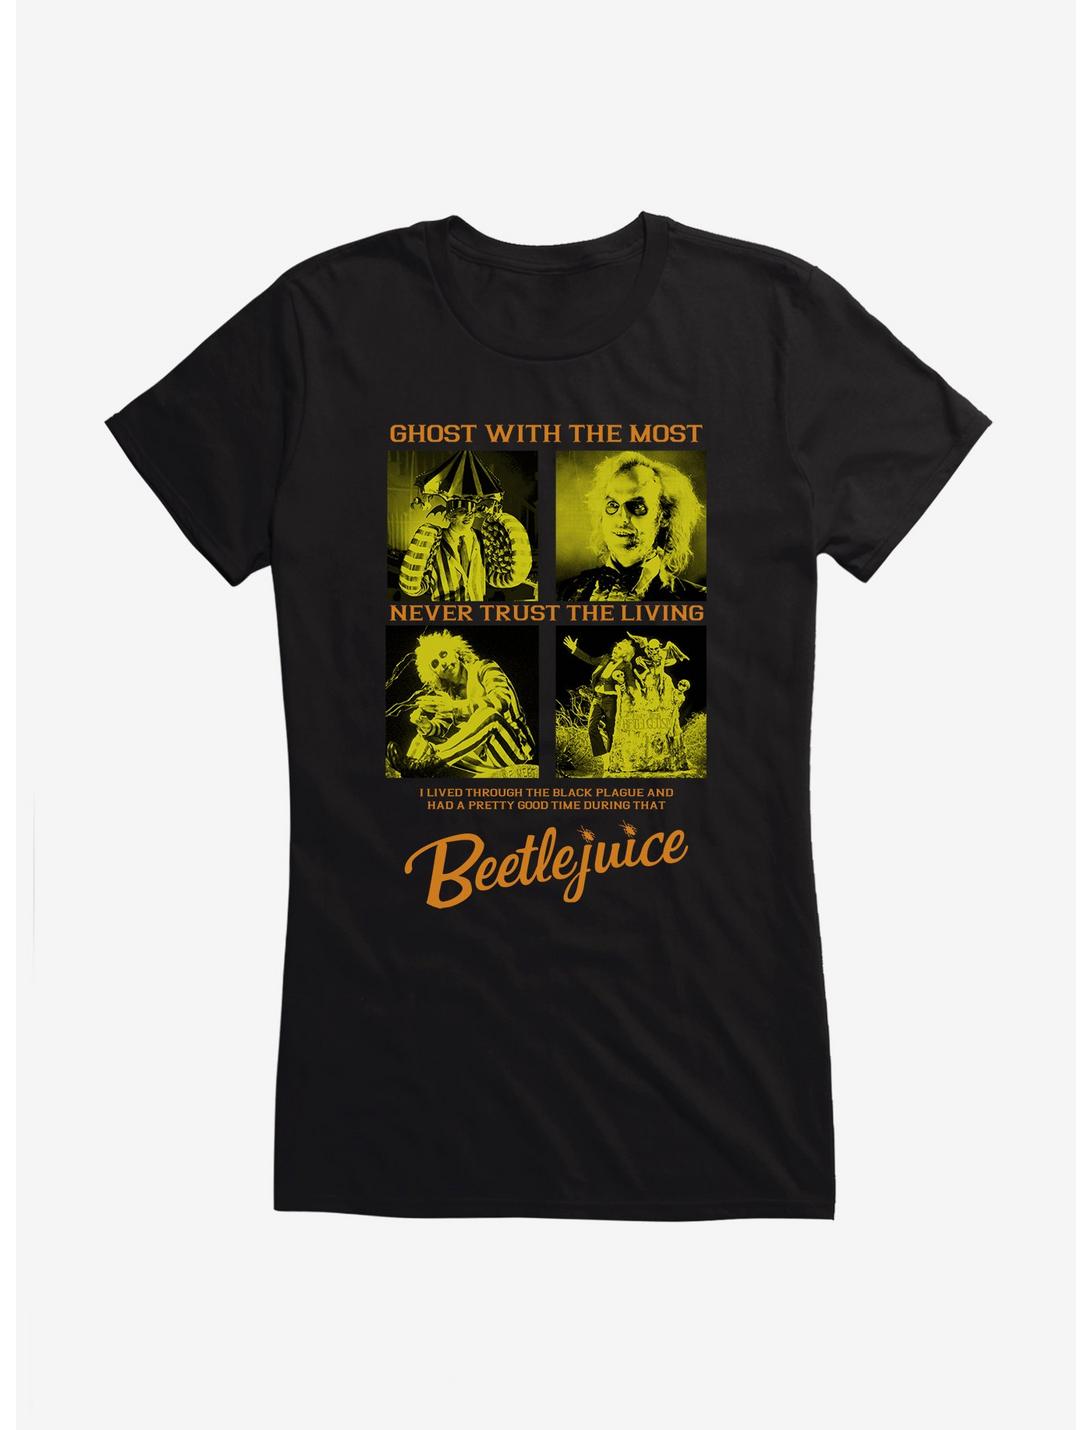 Beetlejuice Ghost With The Most Girls T-Shirt, BLACK, hi-res